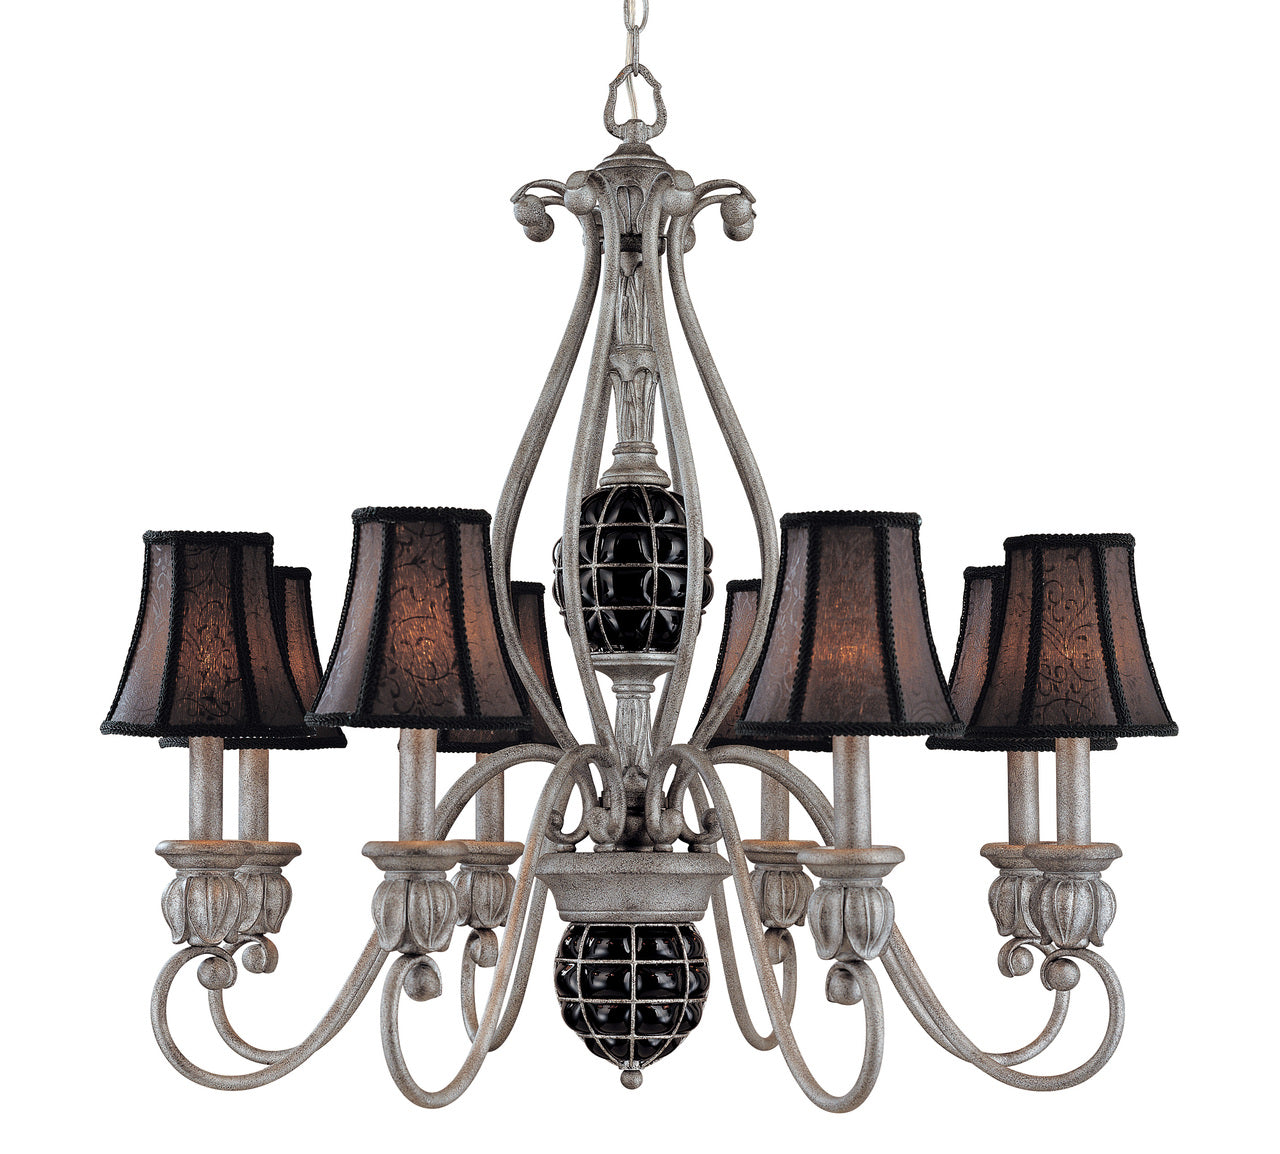 Classic Lighting 71128 AN Catturatto Captured Glass Chandelier in Argento Negro